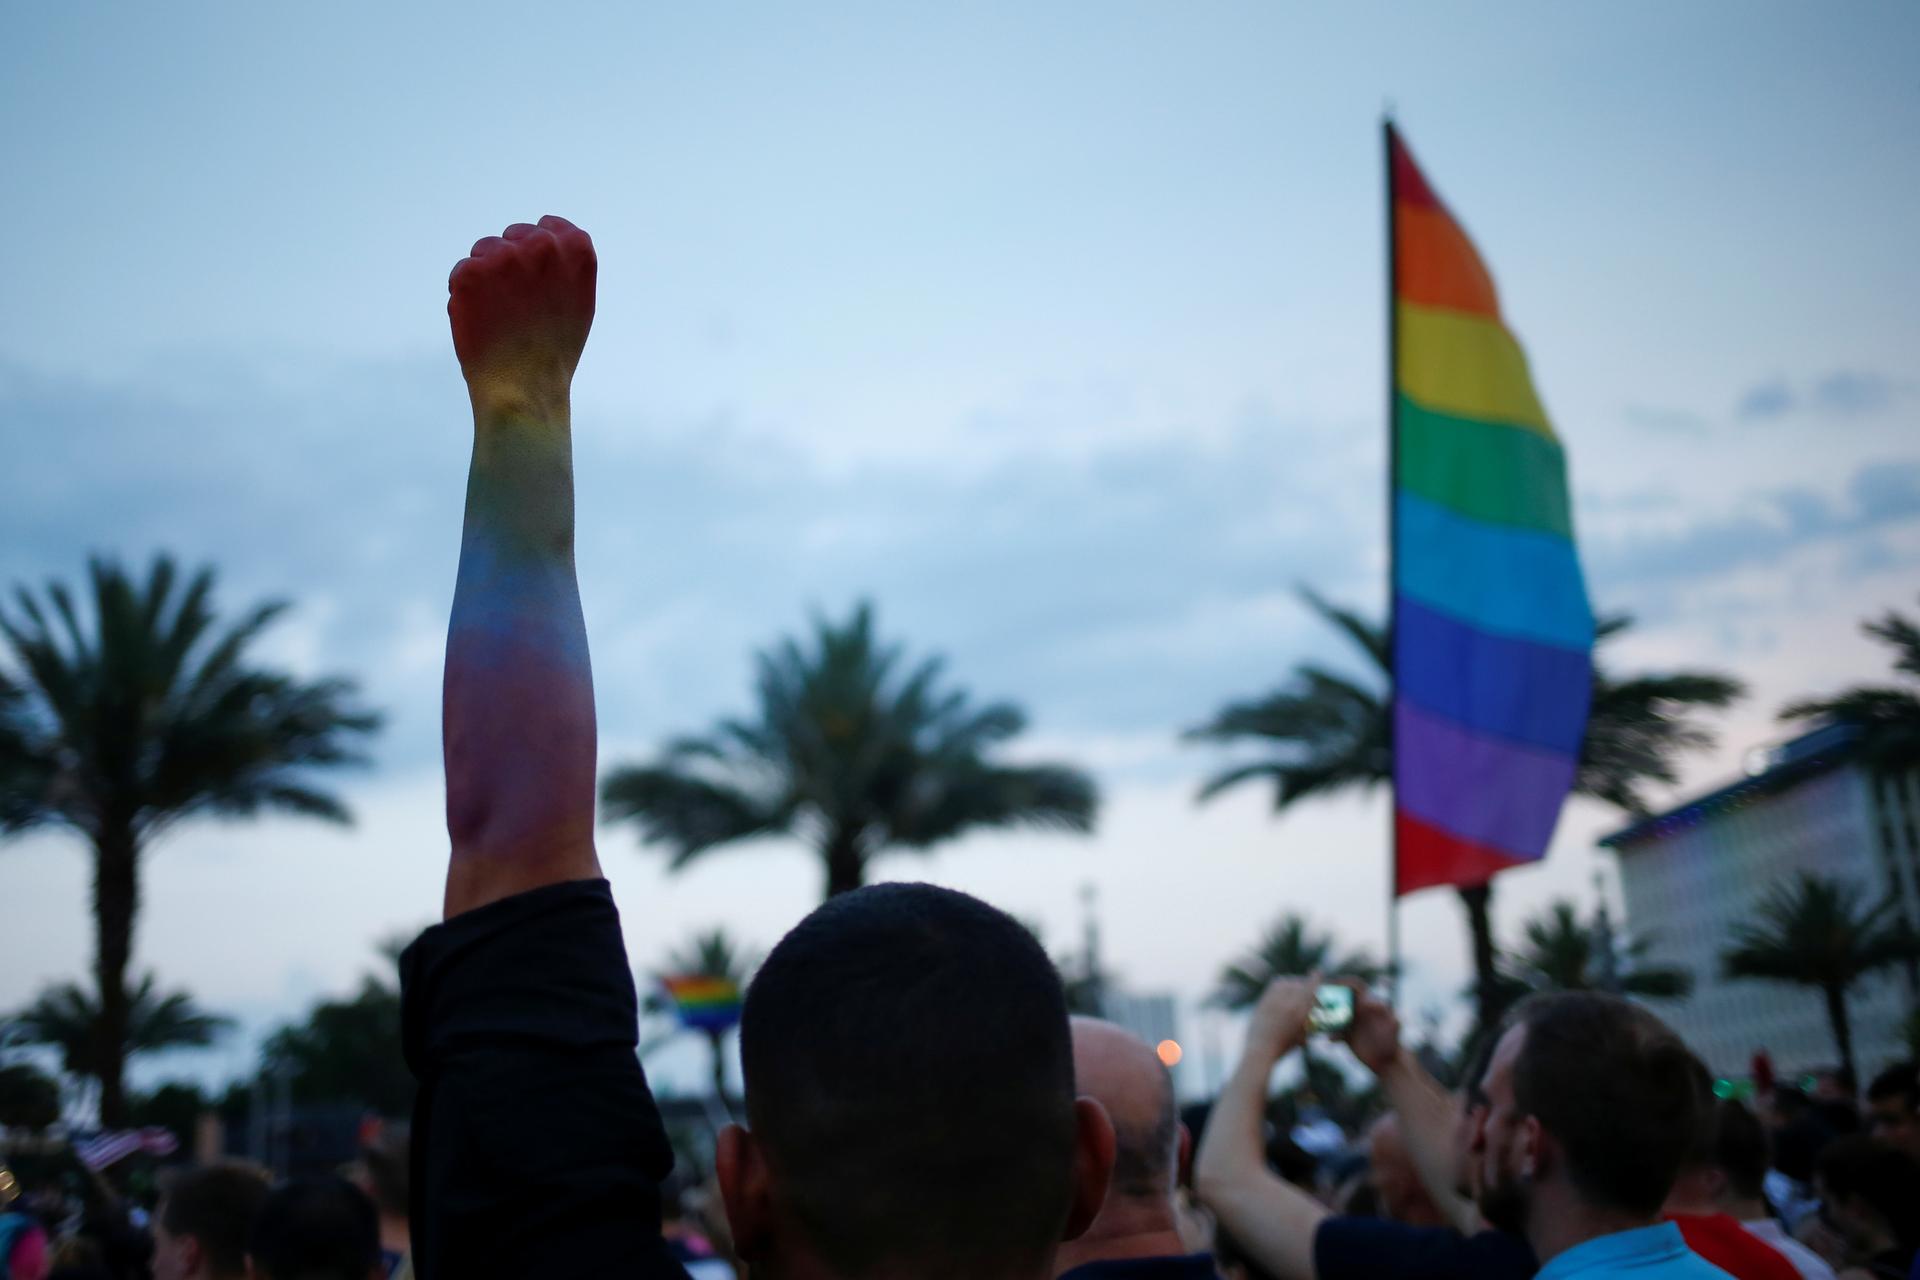 A candle light vigil in memory of victims one day after a mass shooting at the Pulse gay night club in Orlando, Florida, U.S., June 13, 2016.